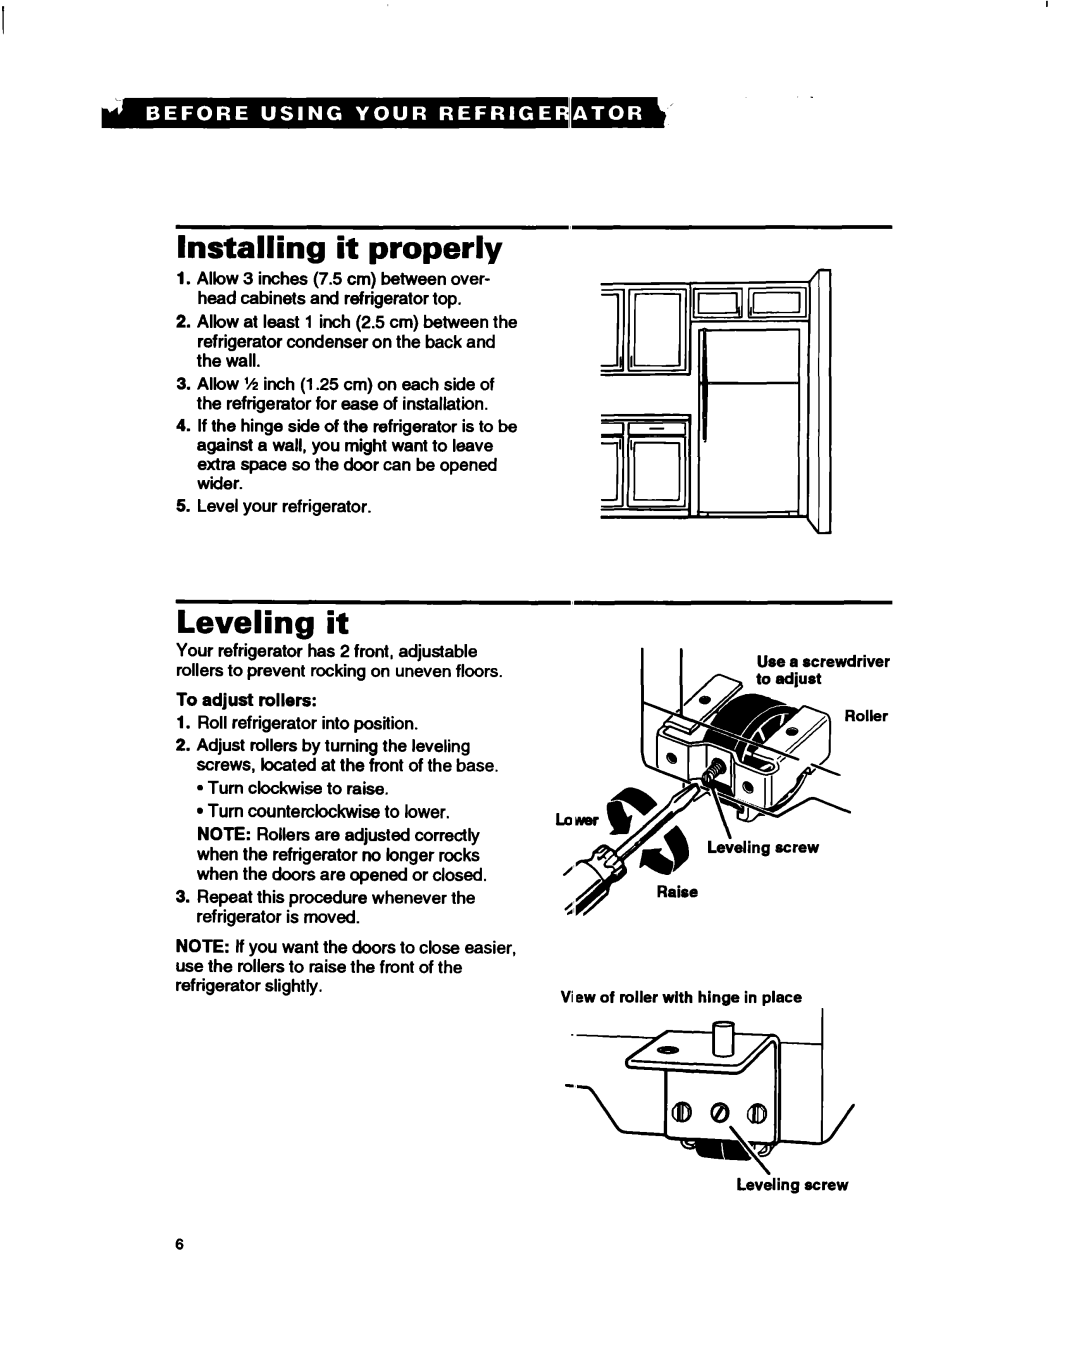 Whirlpool RTl4GD, RT14HK important safety instructions Installing it properly, Leveling it, ‘f7 